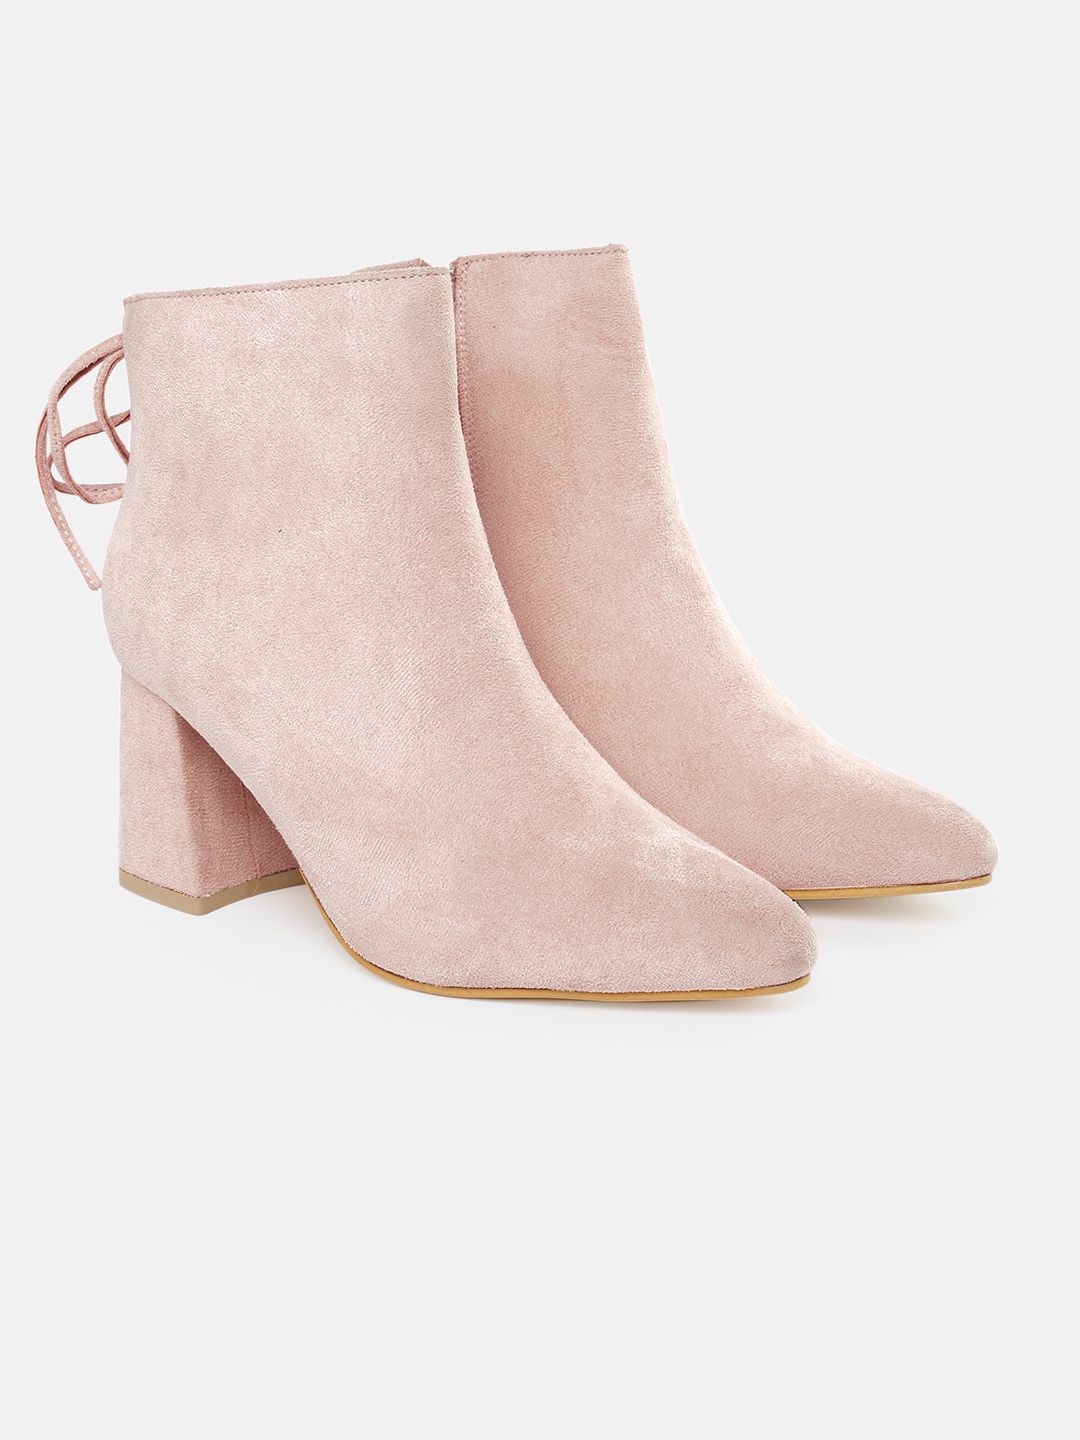 DressBerry Women Peach-Coloured Solid Mid-Top Heeled Boots Price in India